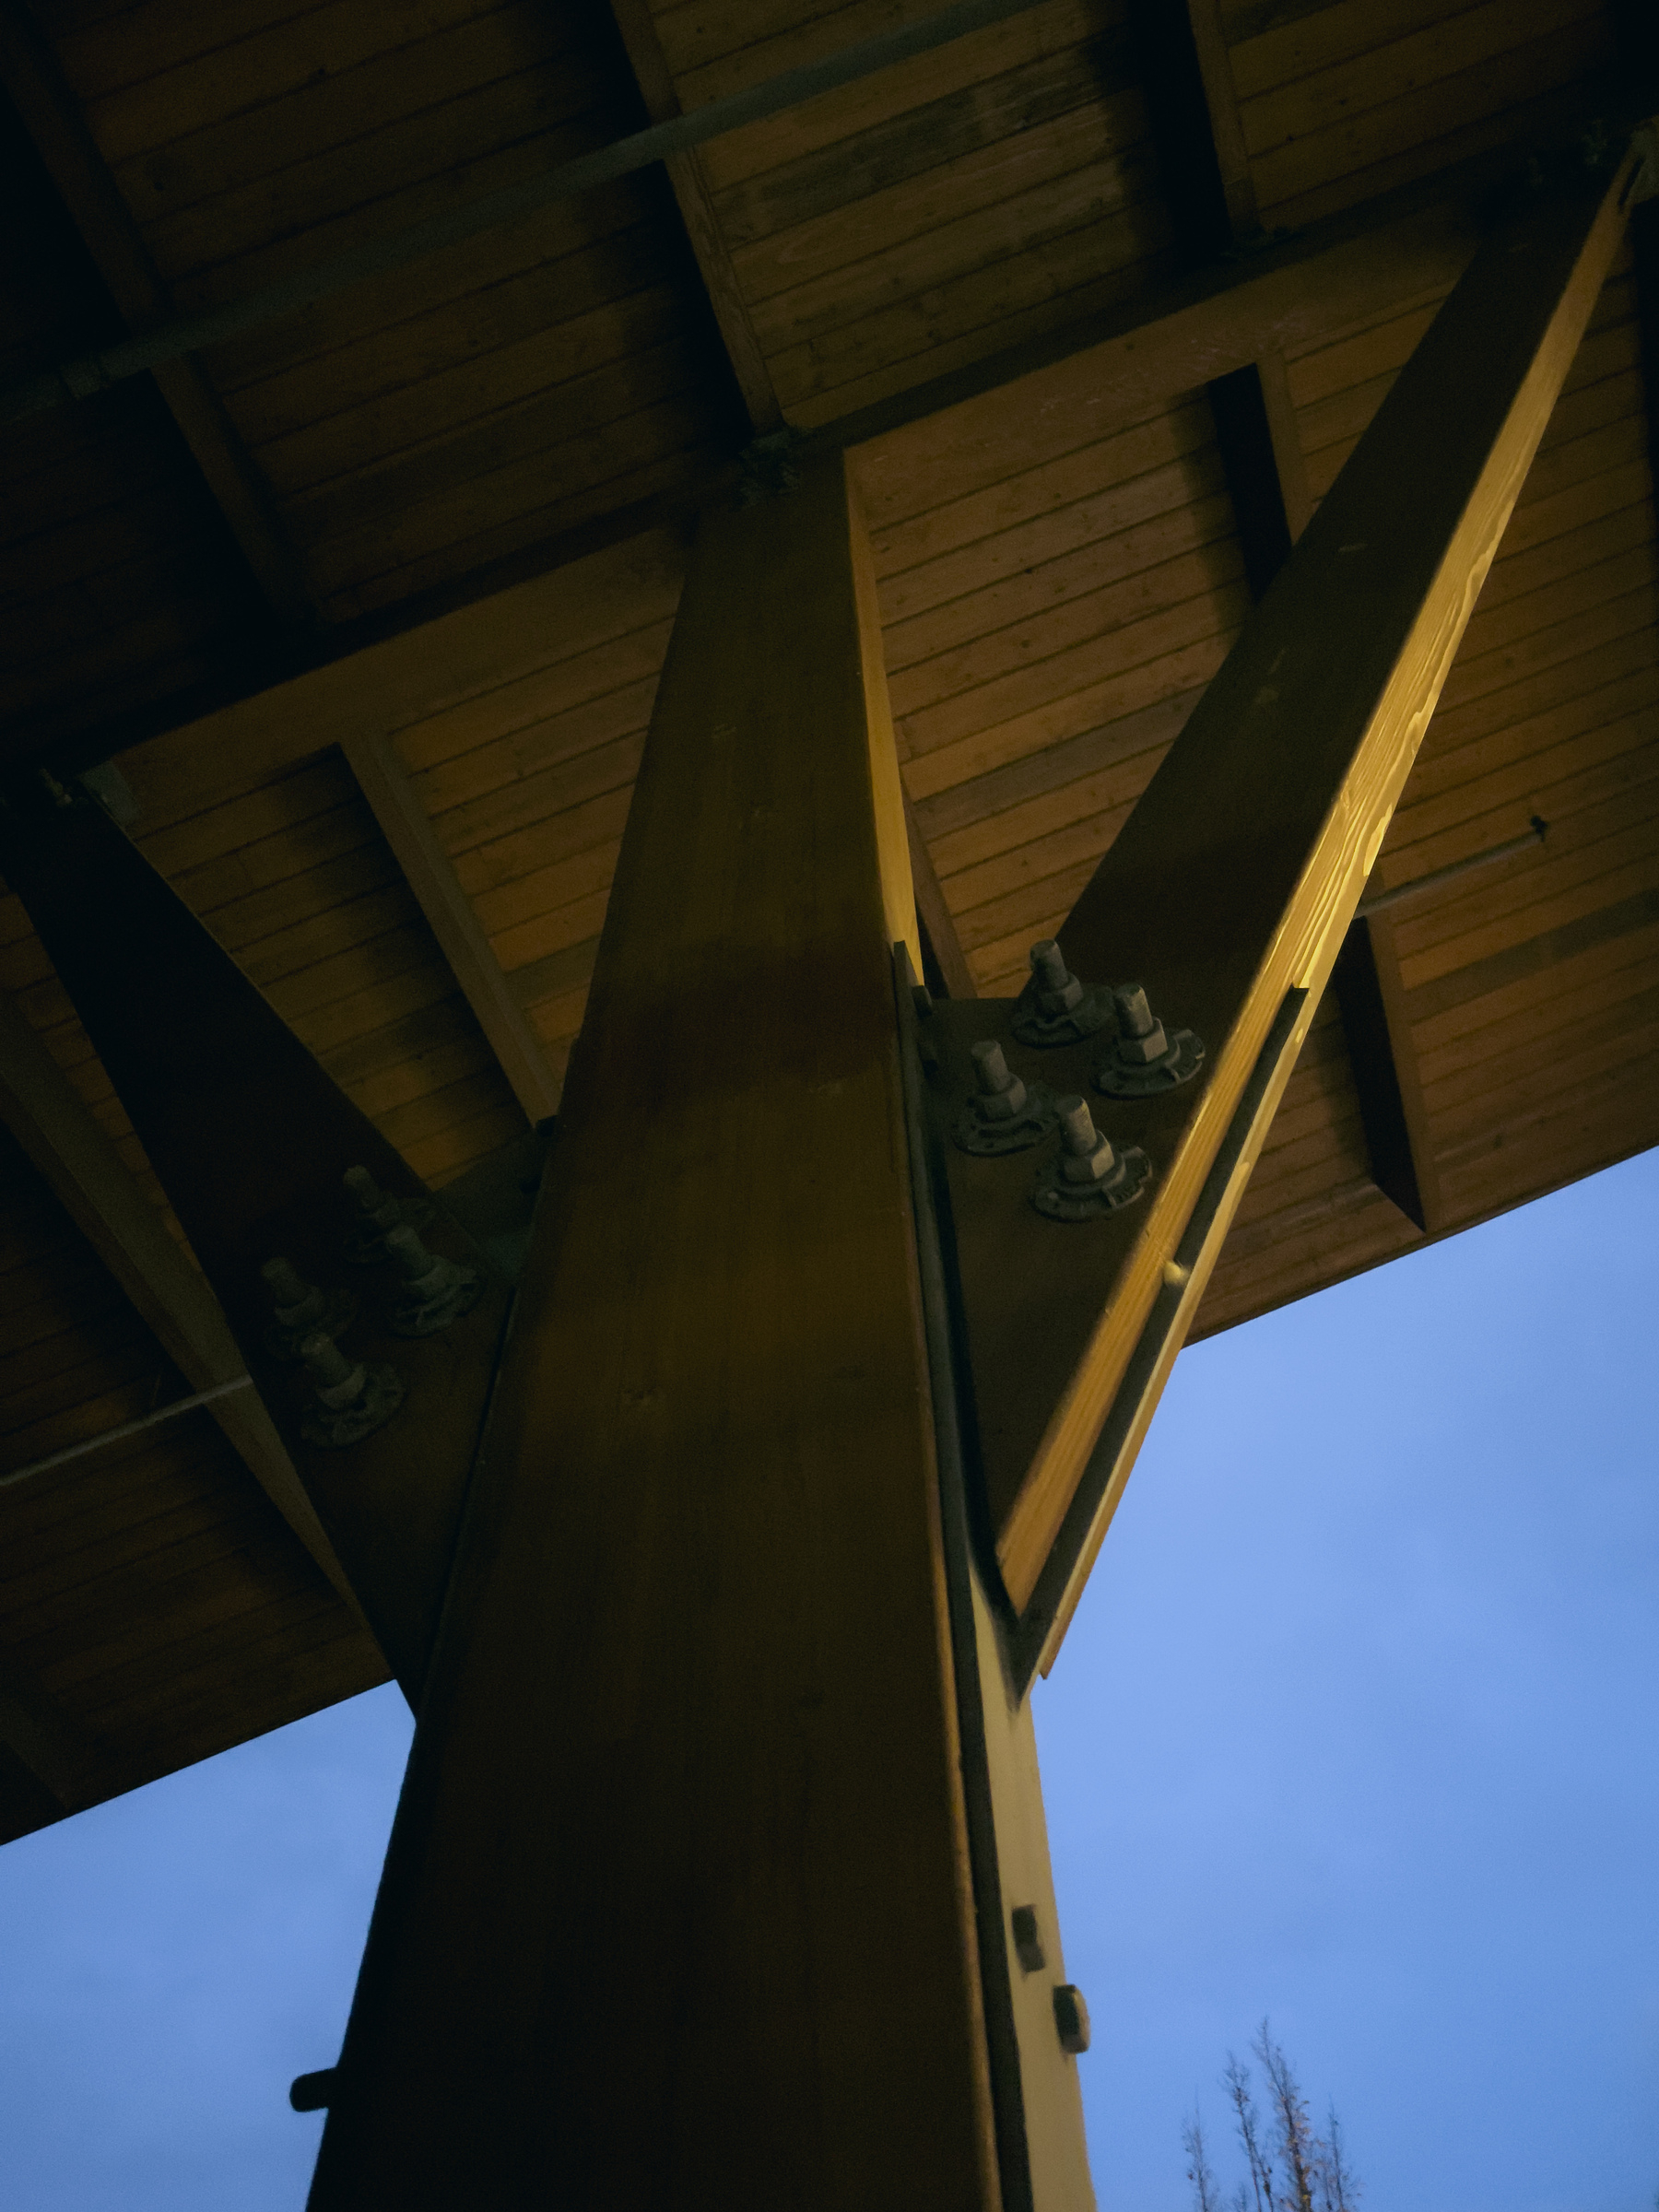 Timber frame building roof support column and diagonal braces.